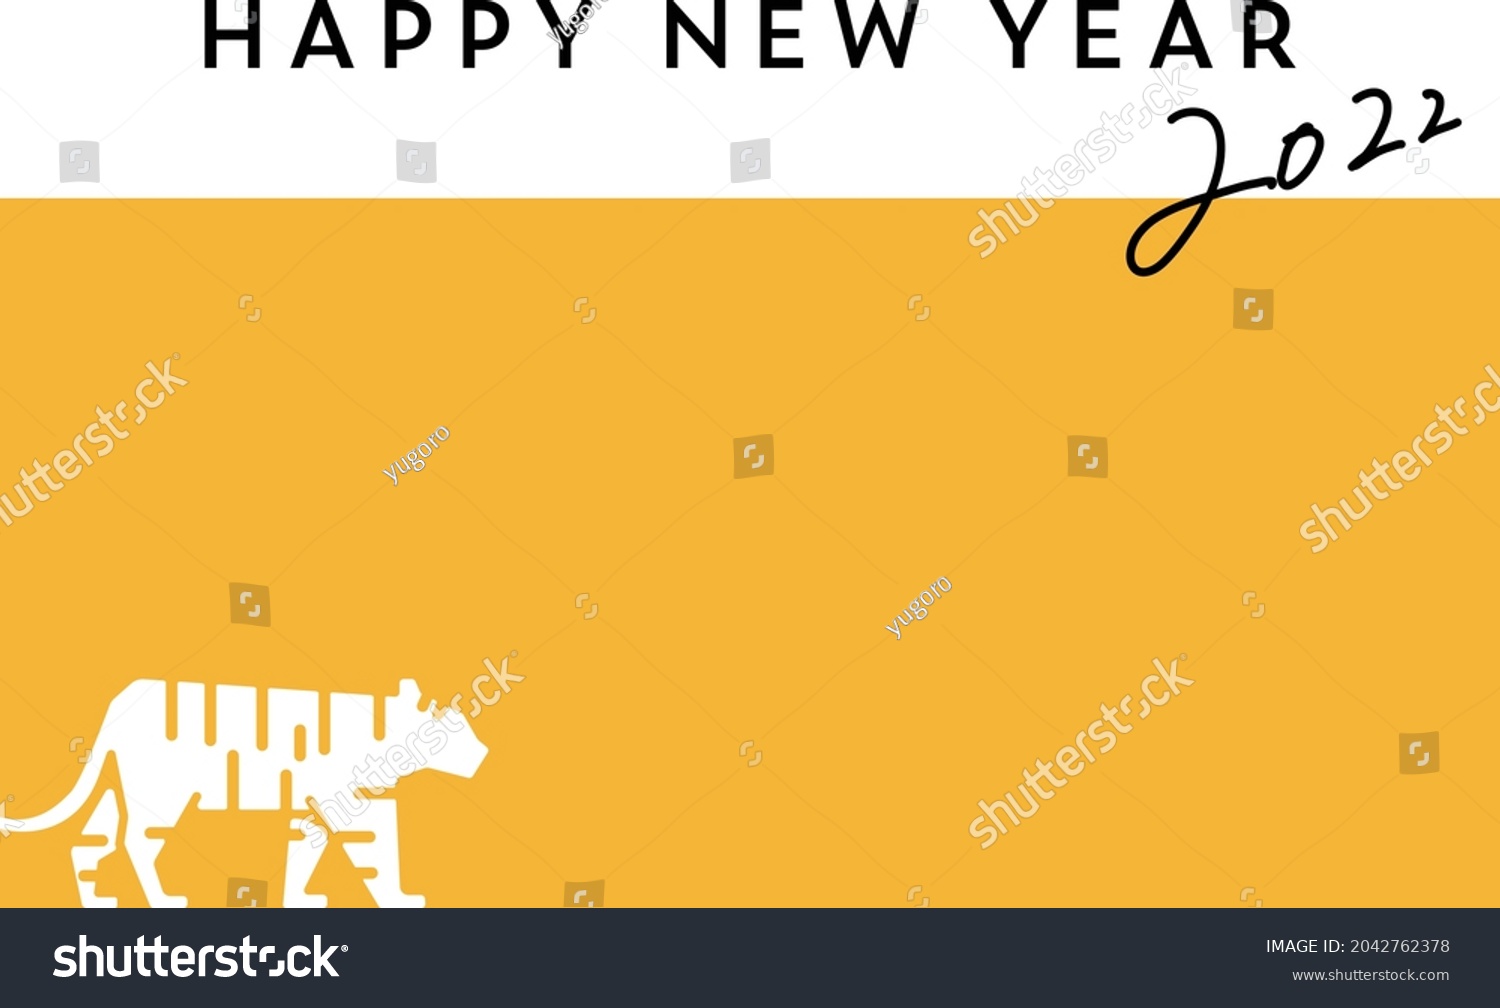 New Year's card template for 2022, the year of the tiger, the Japanese zodiac sign.
This illustration has elements of simple, stylish, Japan, silhouette, animal, wild, yellow etc. #2042762378